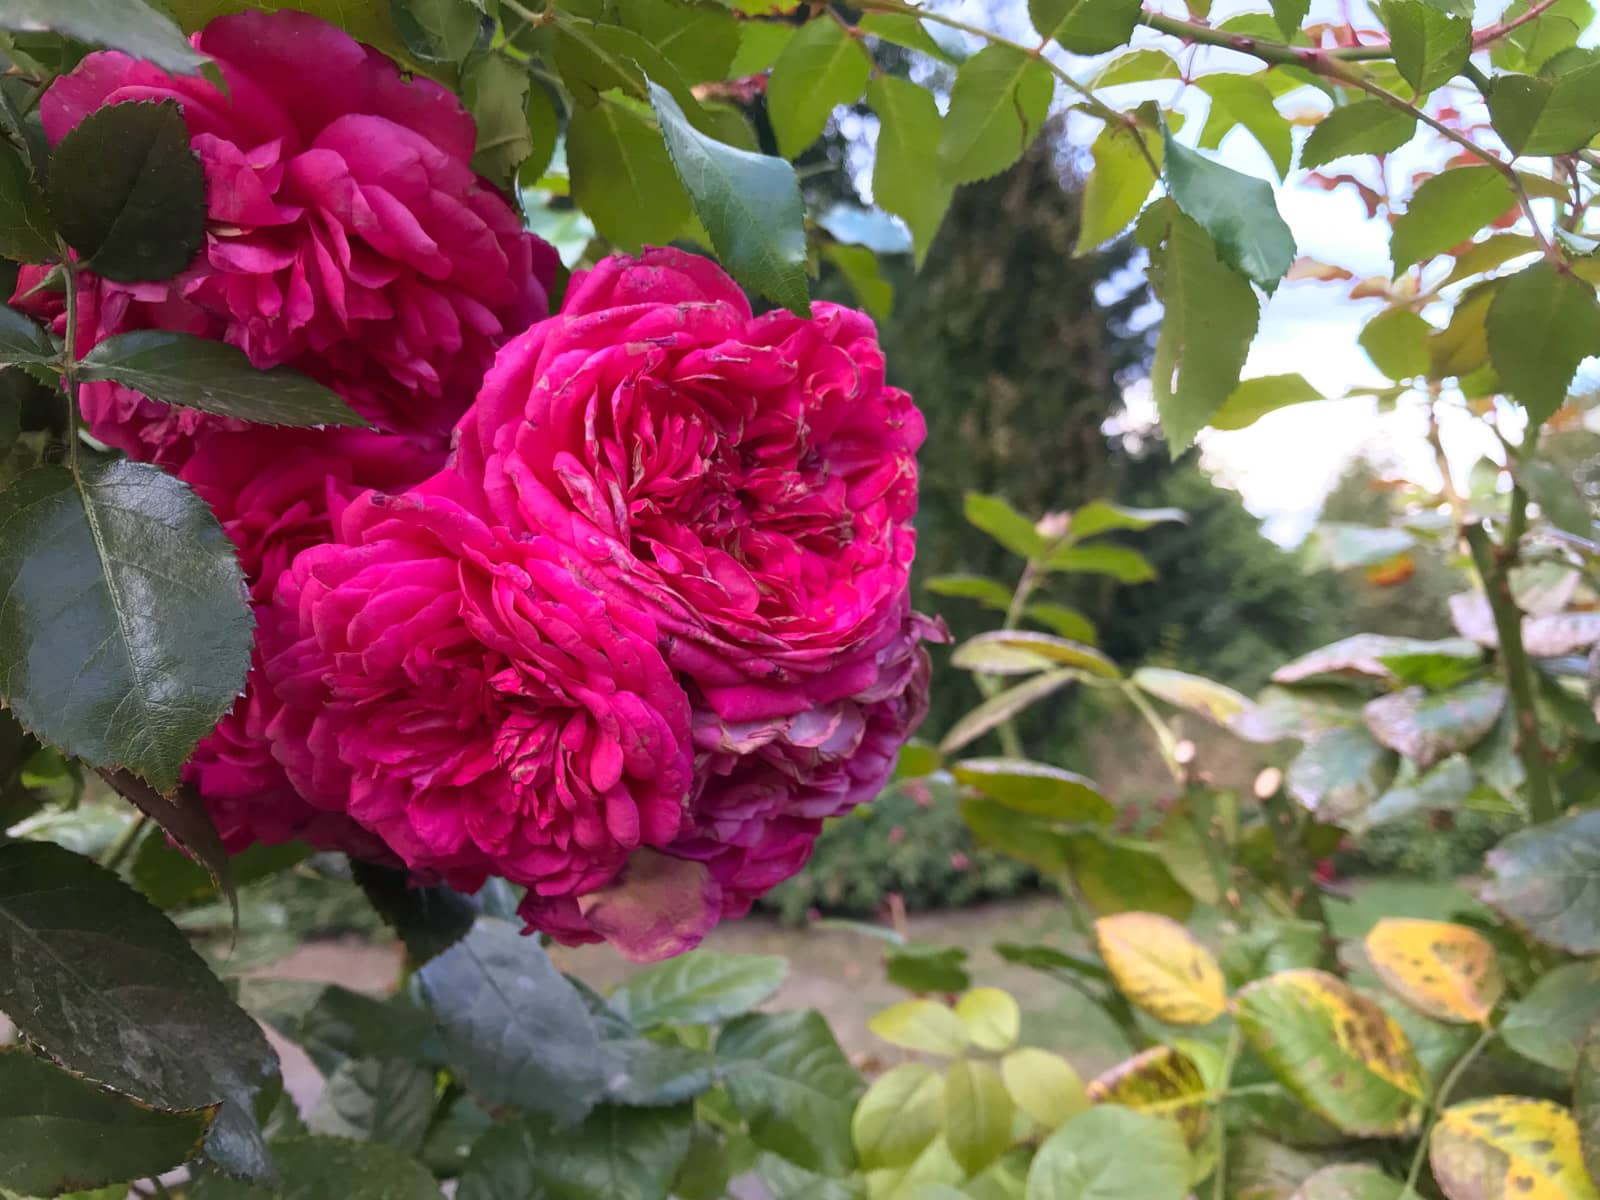 A close up of a group of pink roses